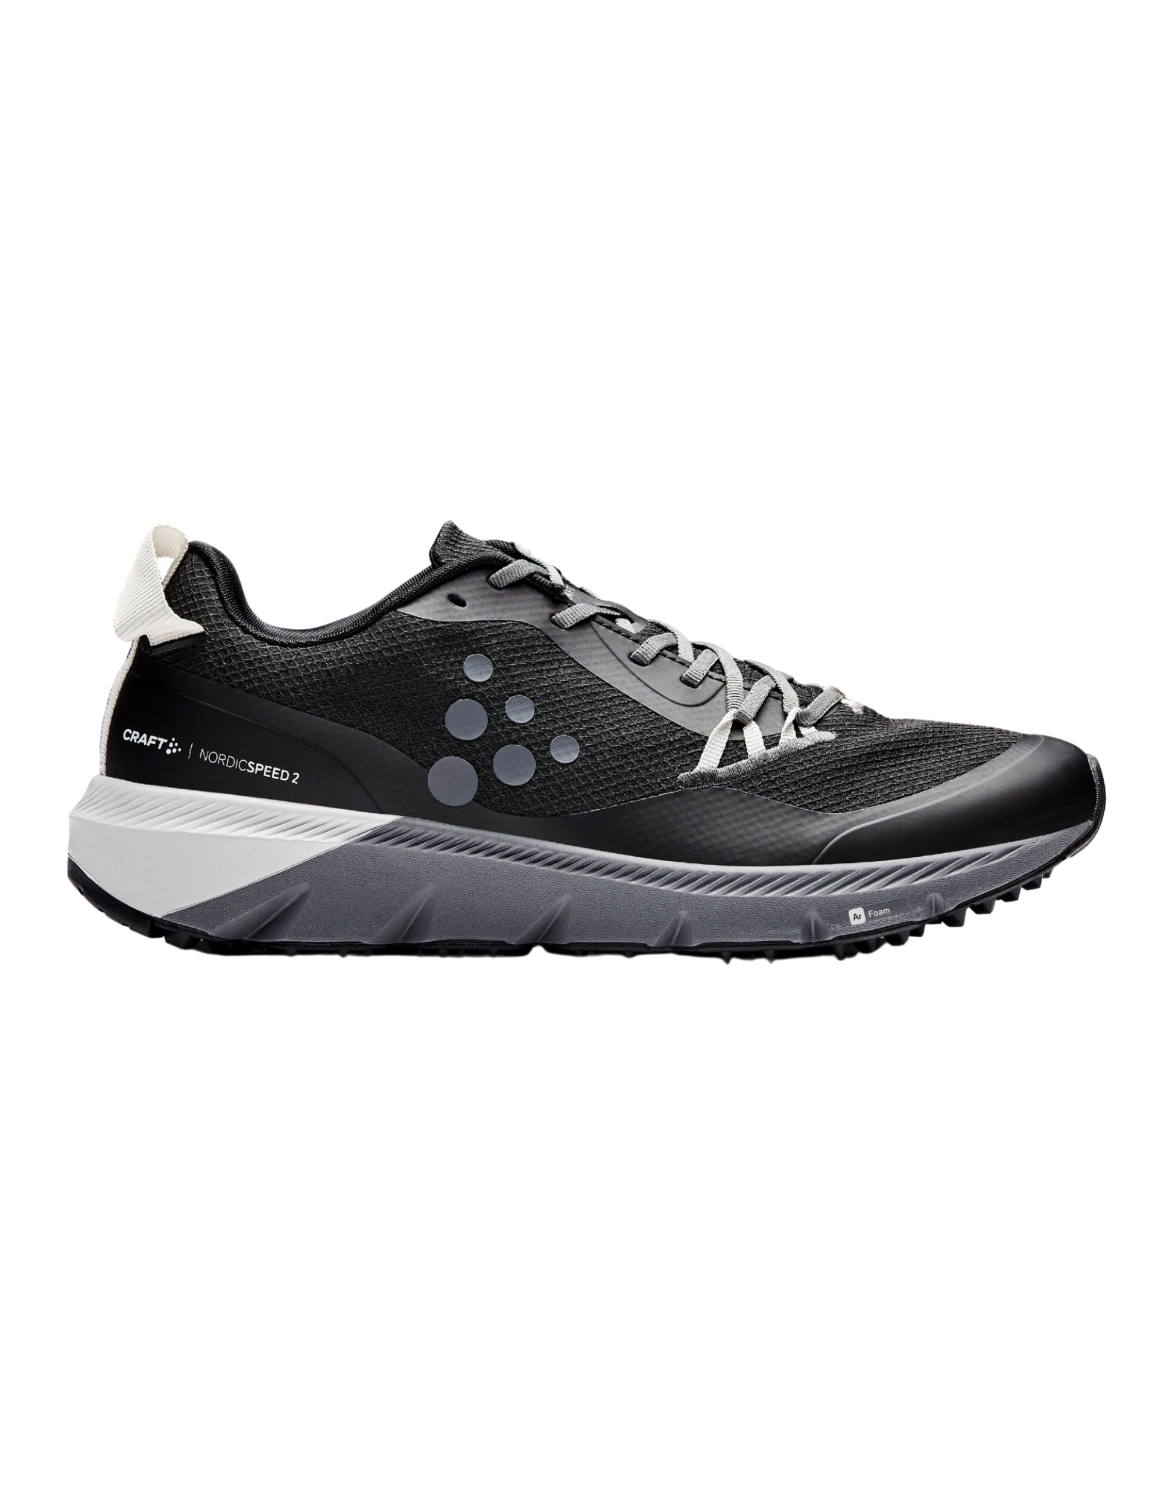 Chaussures de Trail Craft ADV Nordic Speed 2 Homme